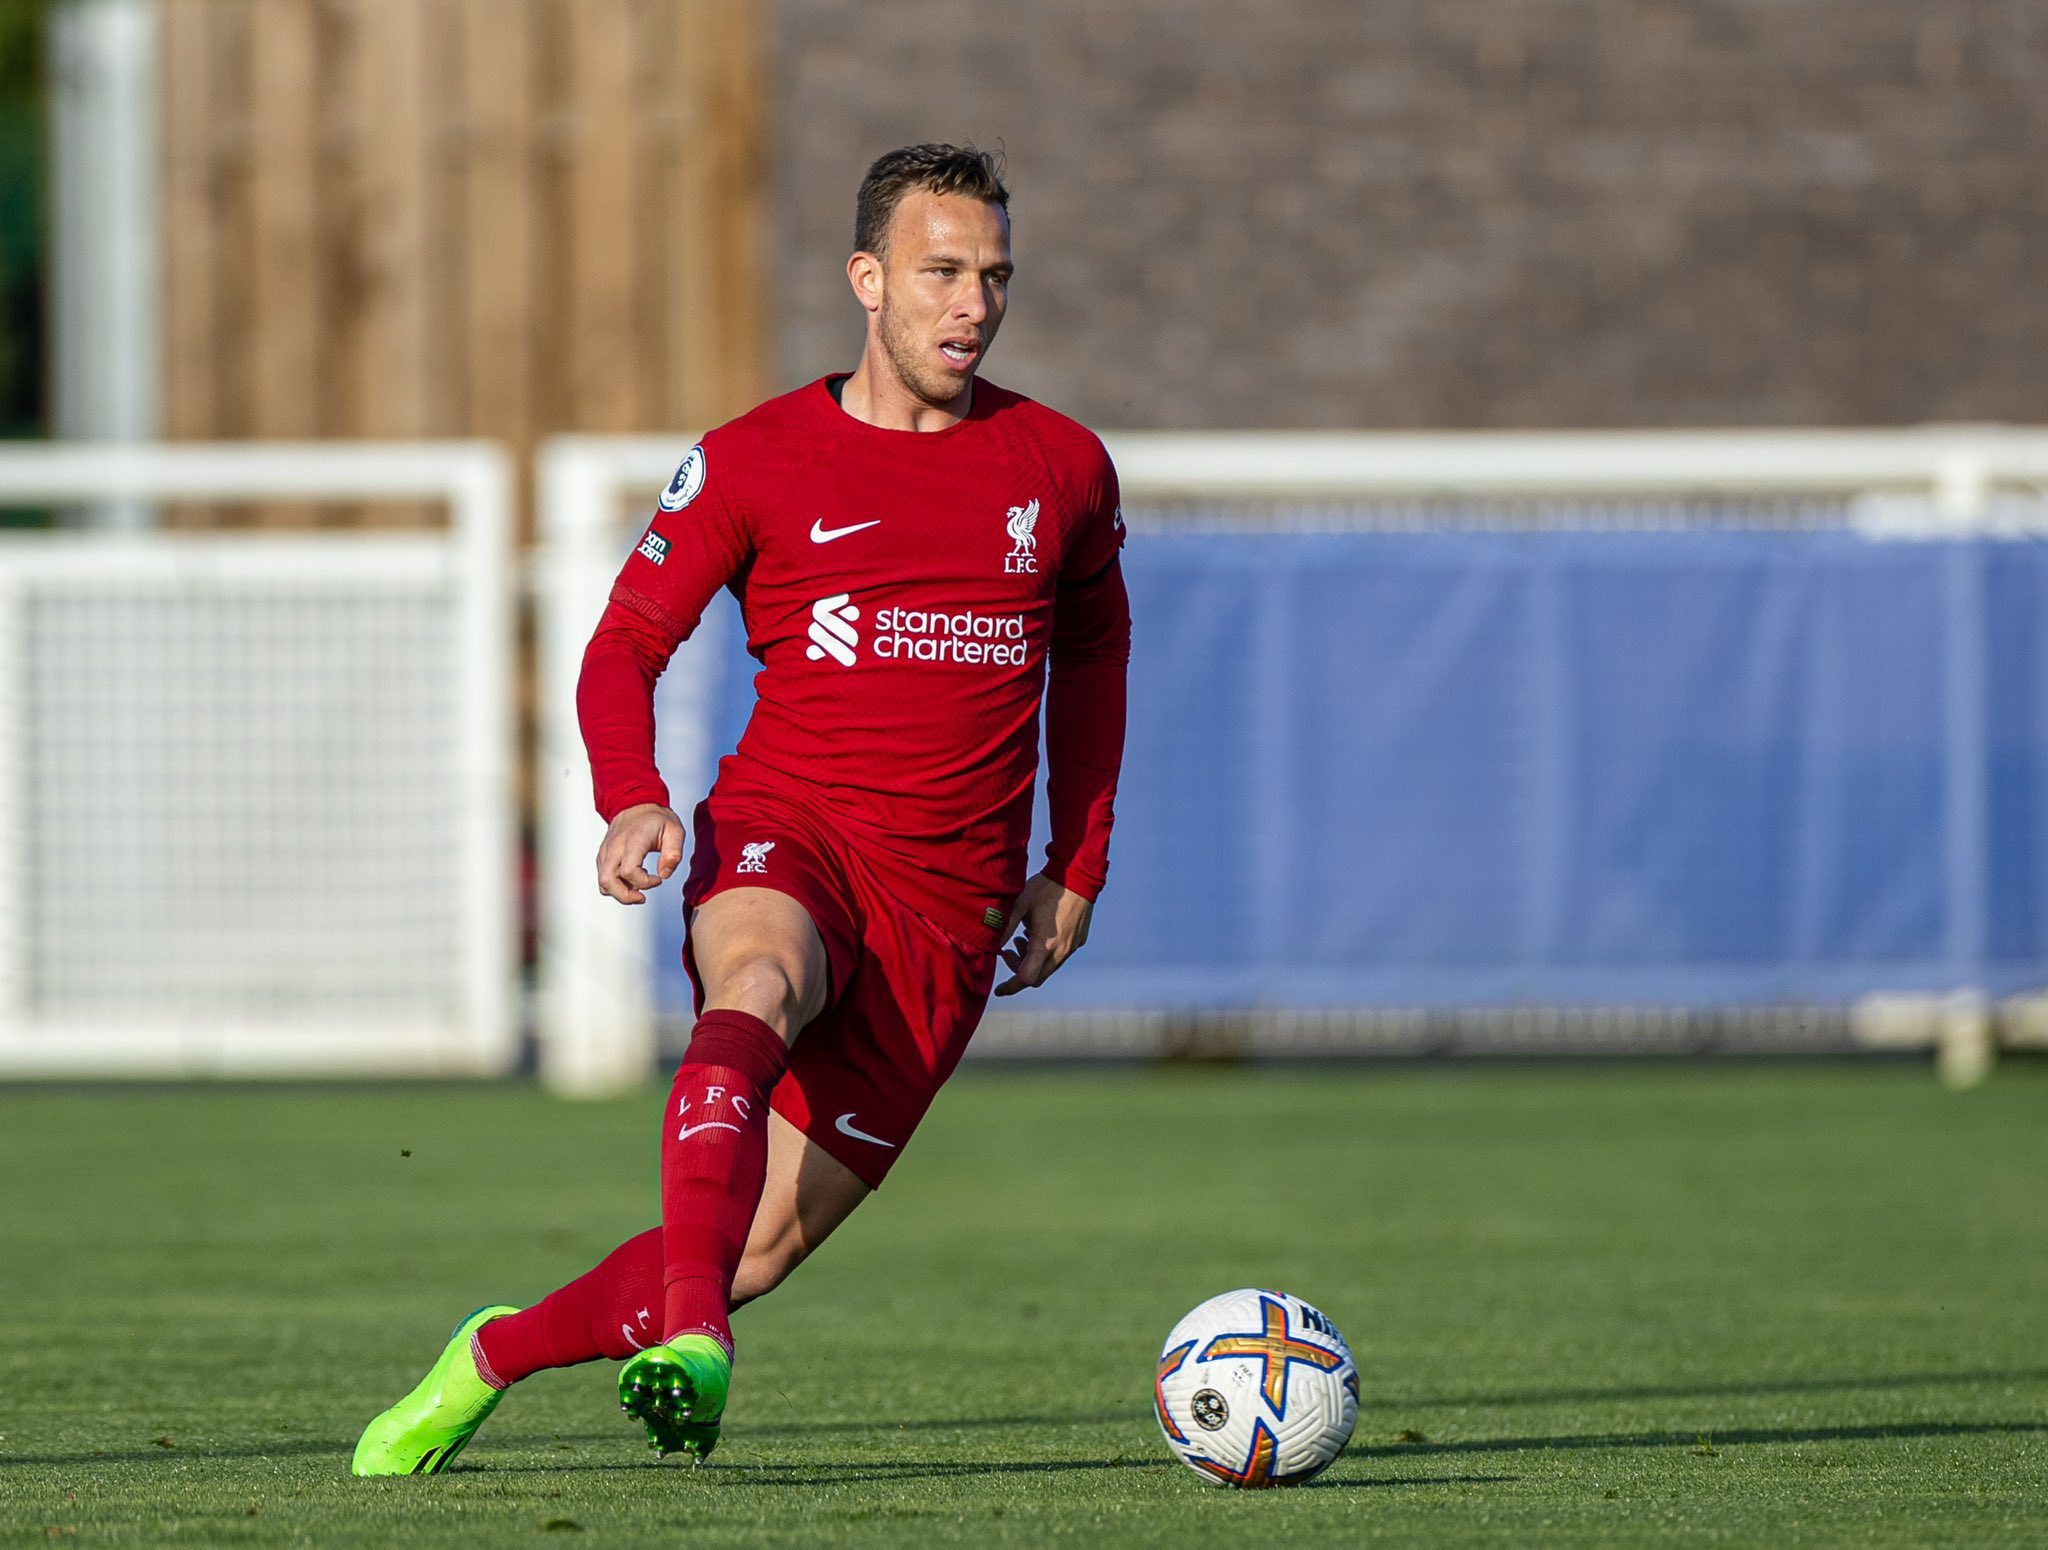 Fabrizio Romano on Twitter: "Arthur Melo had the chance to play for 90  minutes with Liverpool U21 team — it's his first start in 129 days, working  hard to be 100% ready.